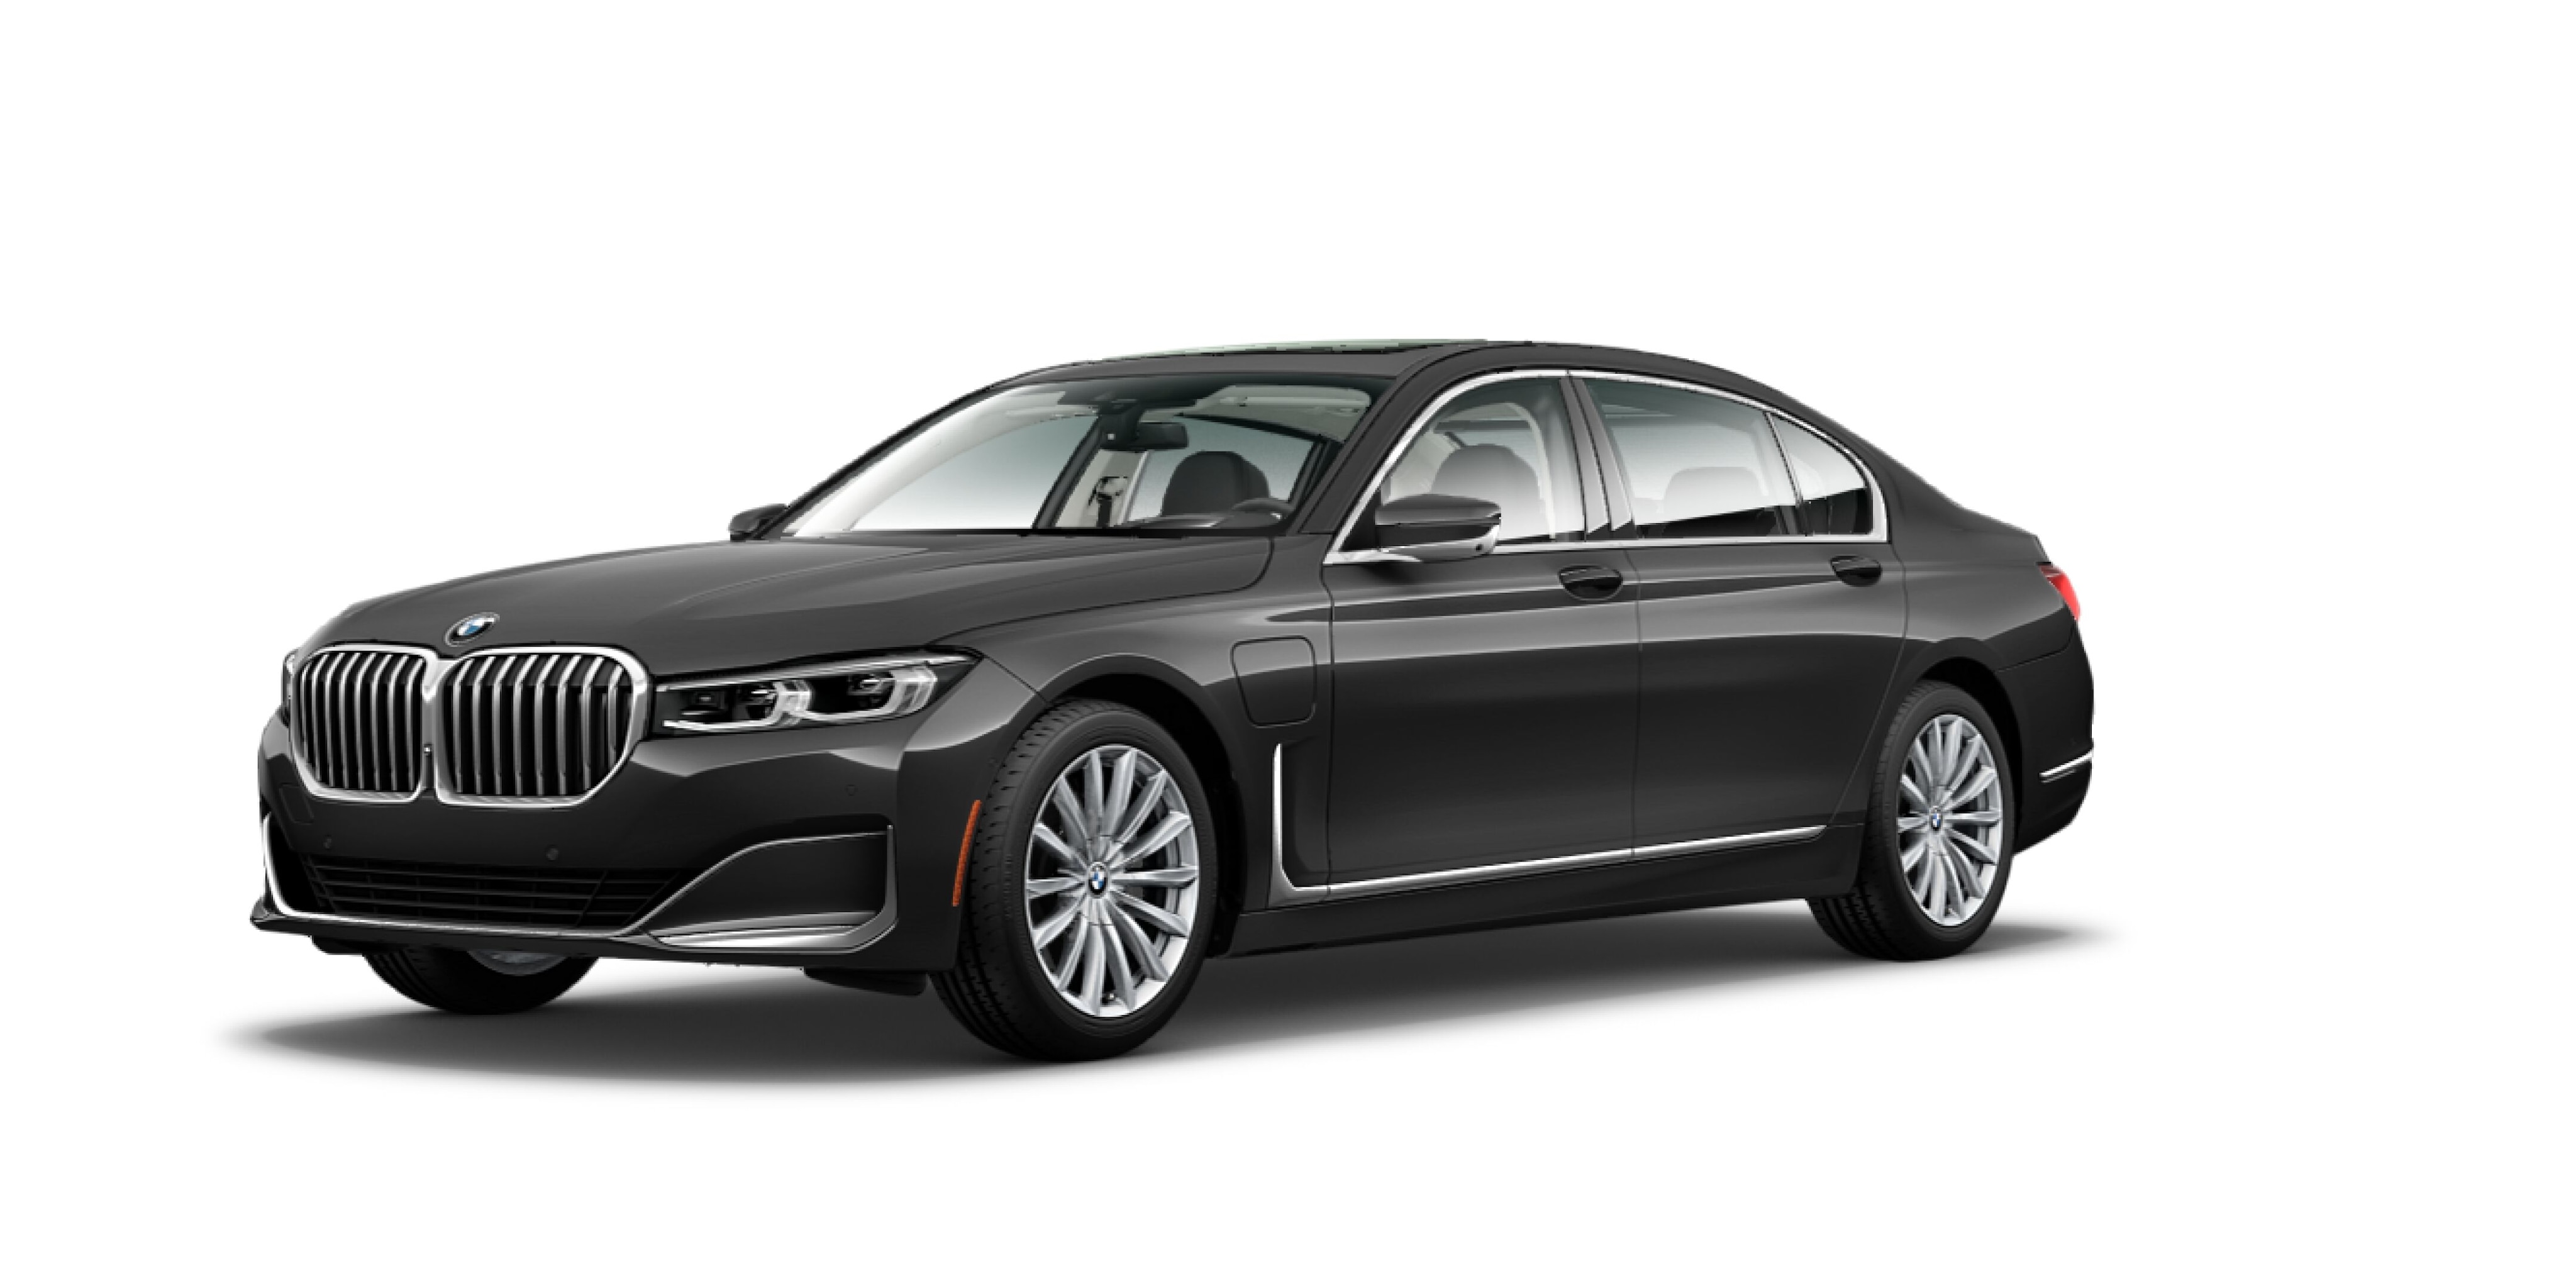 2020 BMW 745e For Sale in Norwood MA | BMW of Norwood